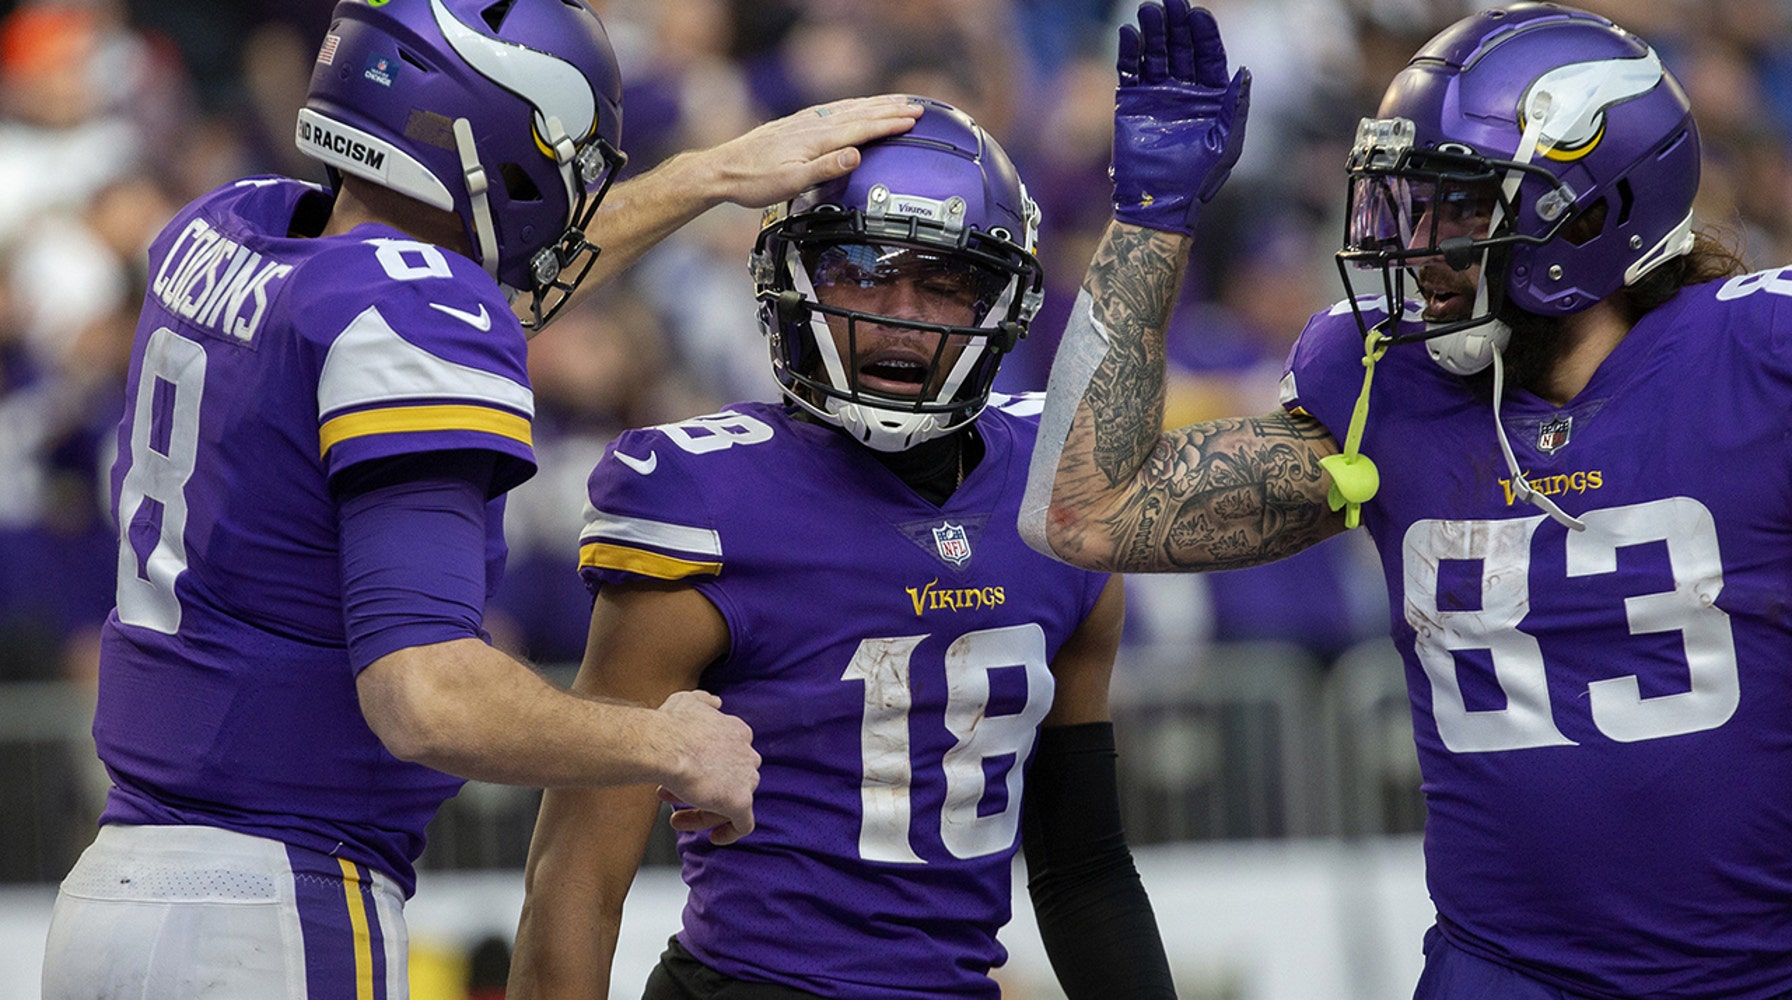 Vikings unveil throwback uniform that pays homage to the 1960s